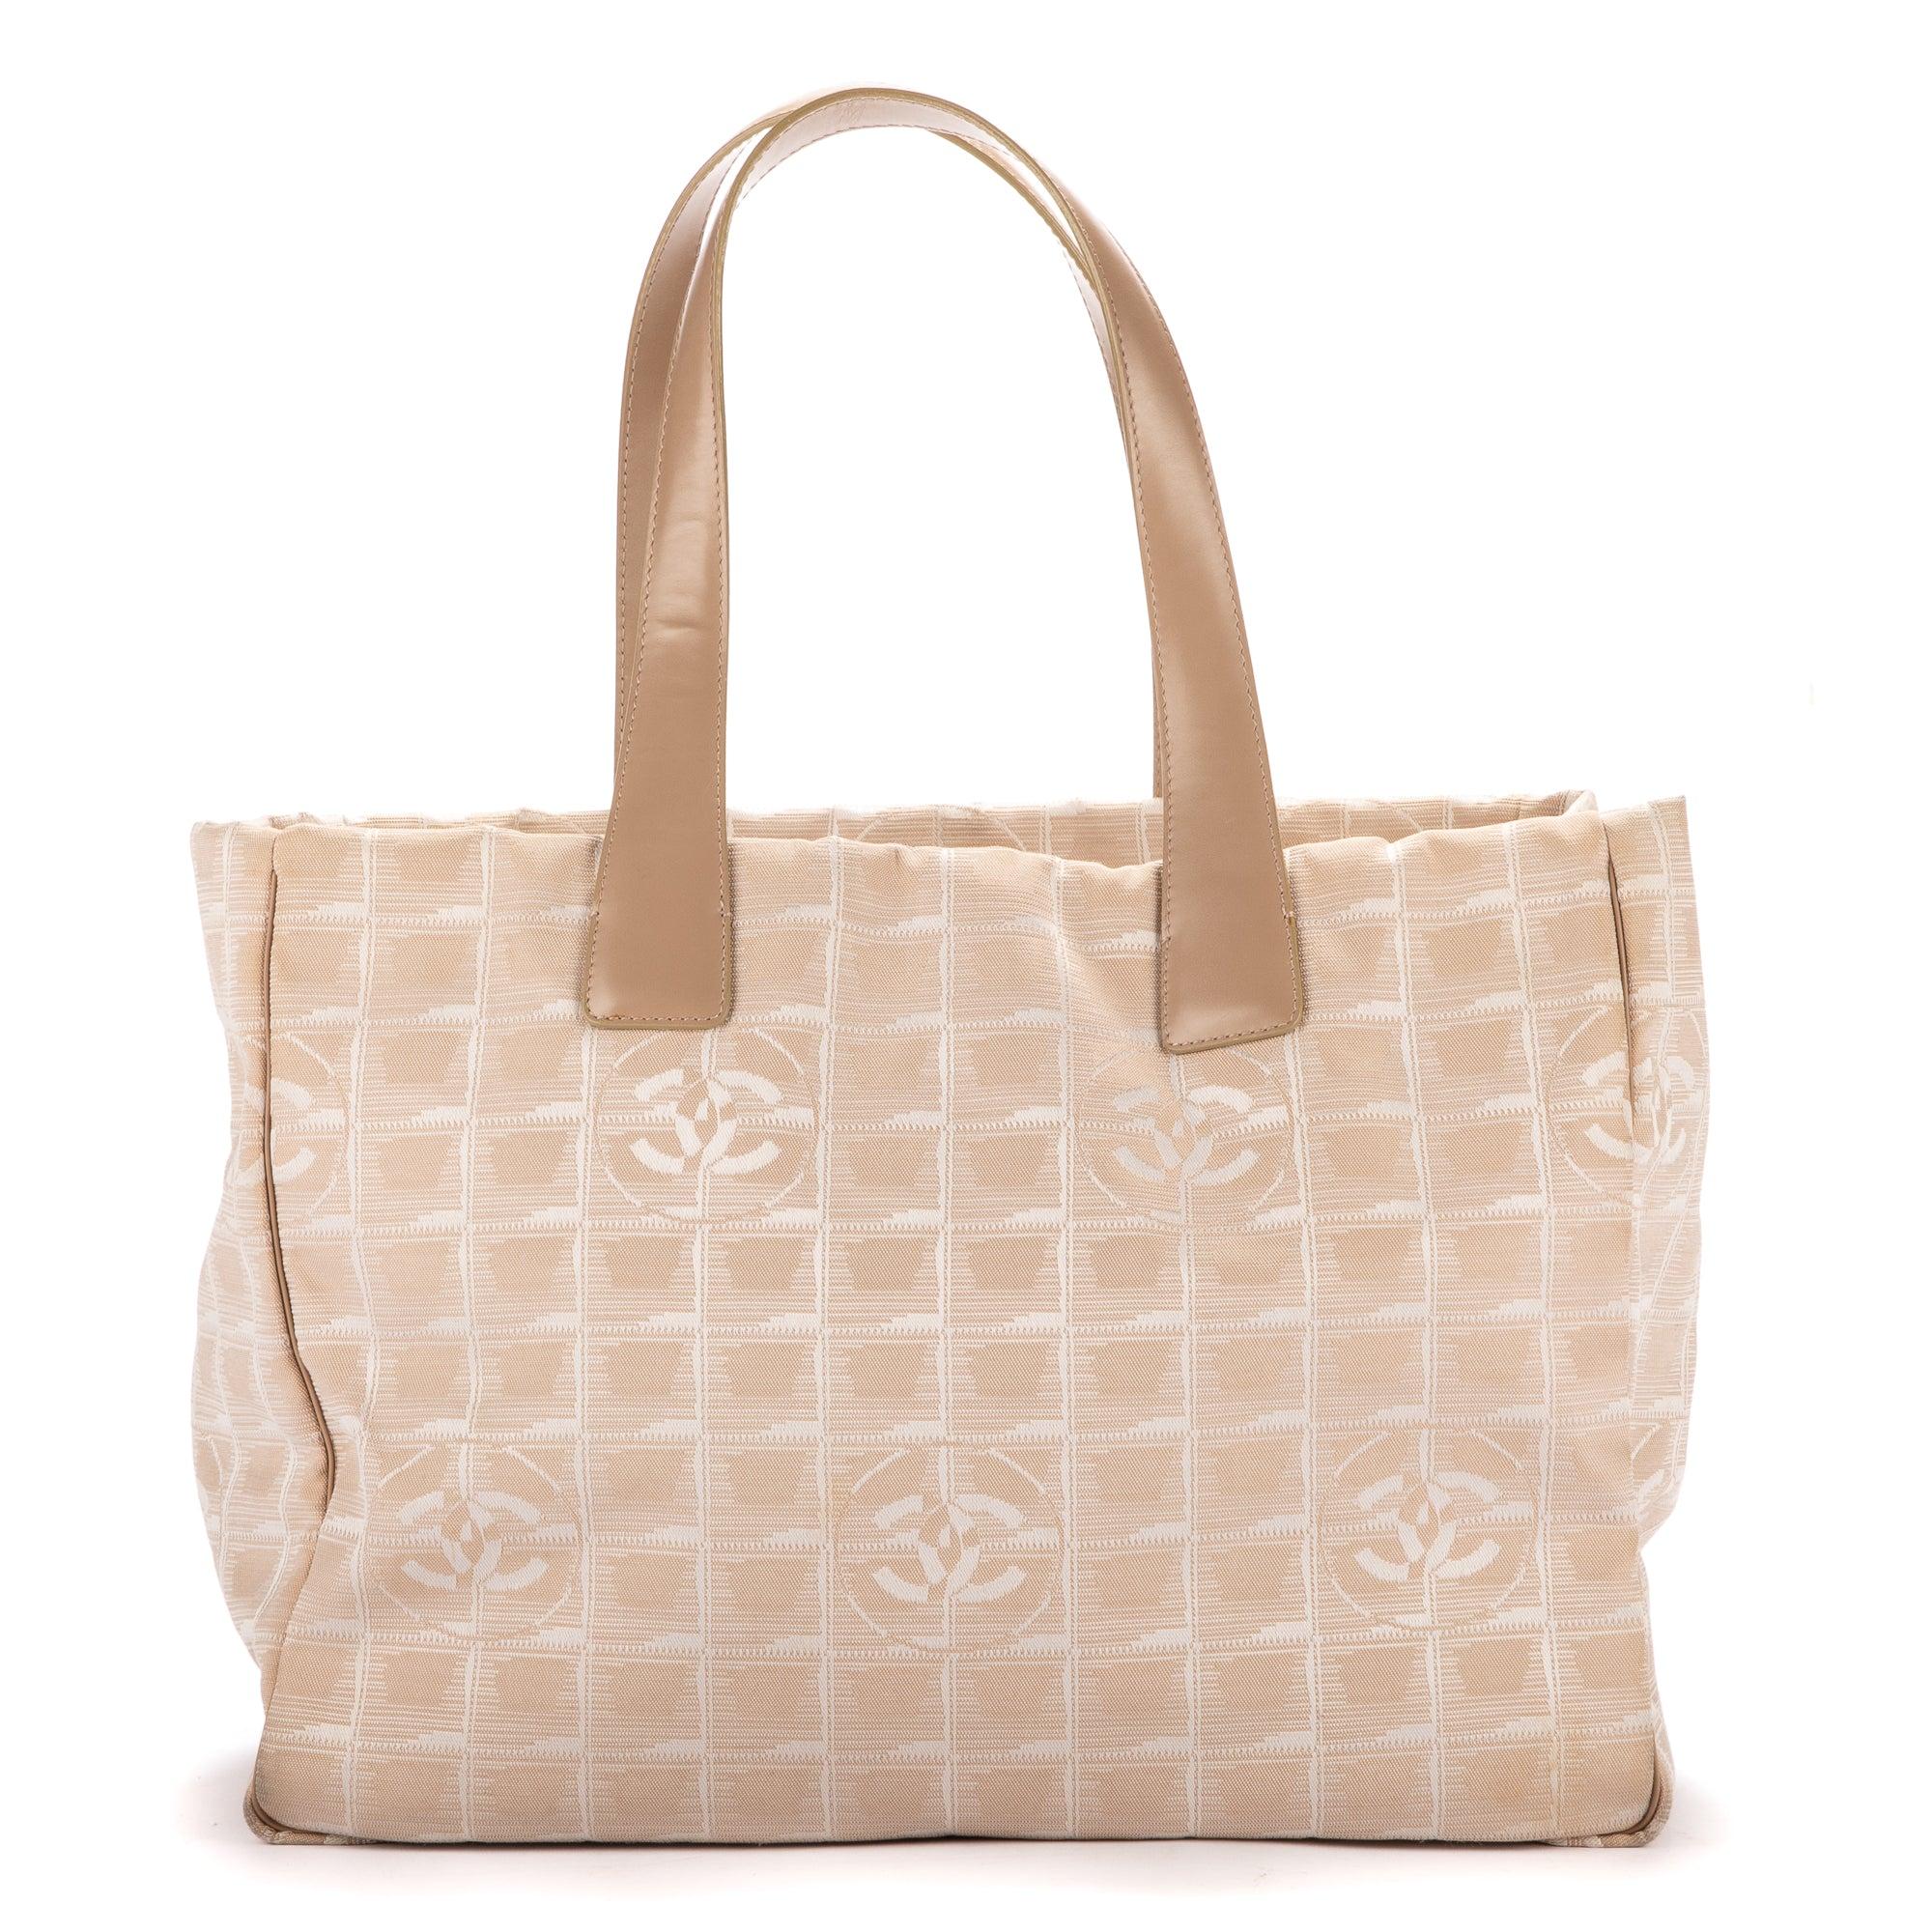 Chanel Travel Line Tote in Natural